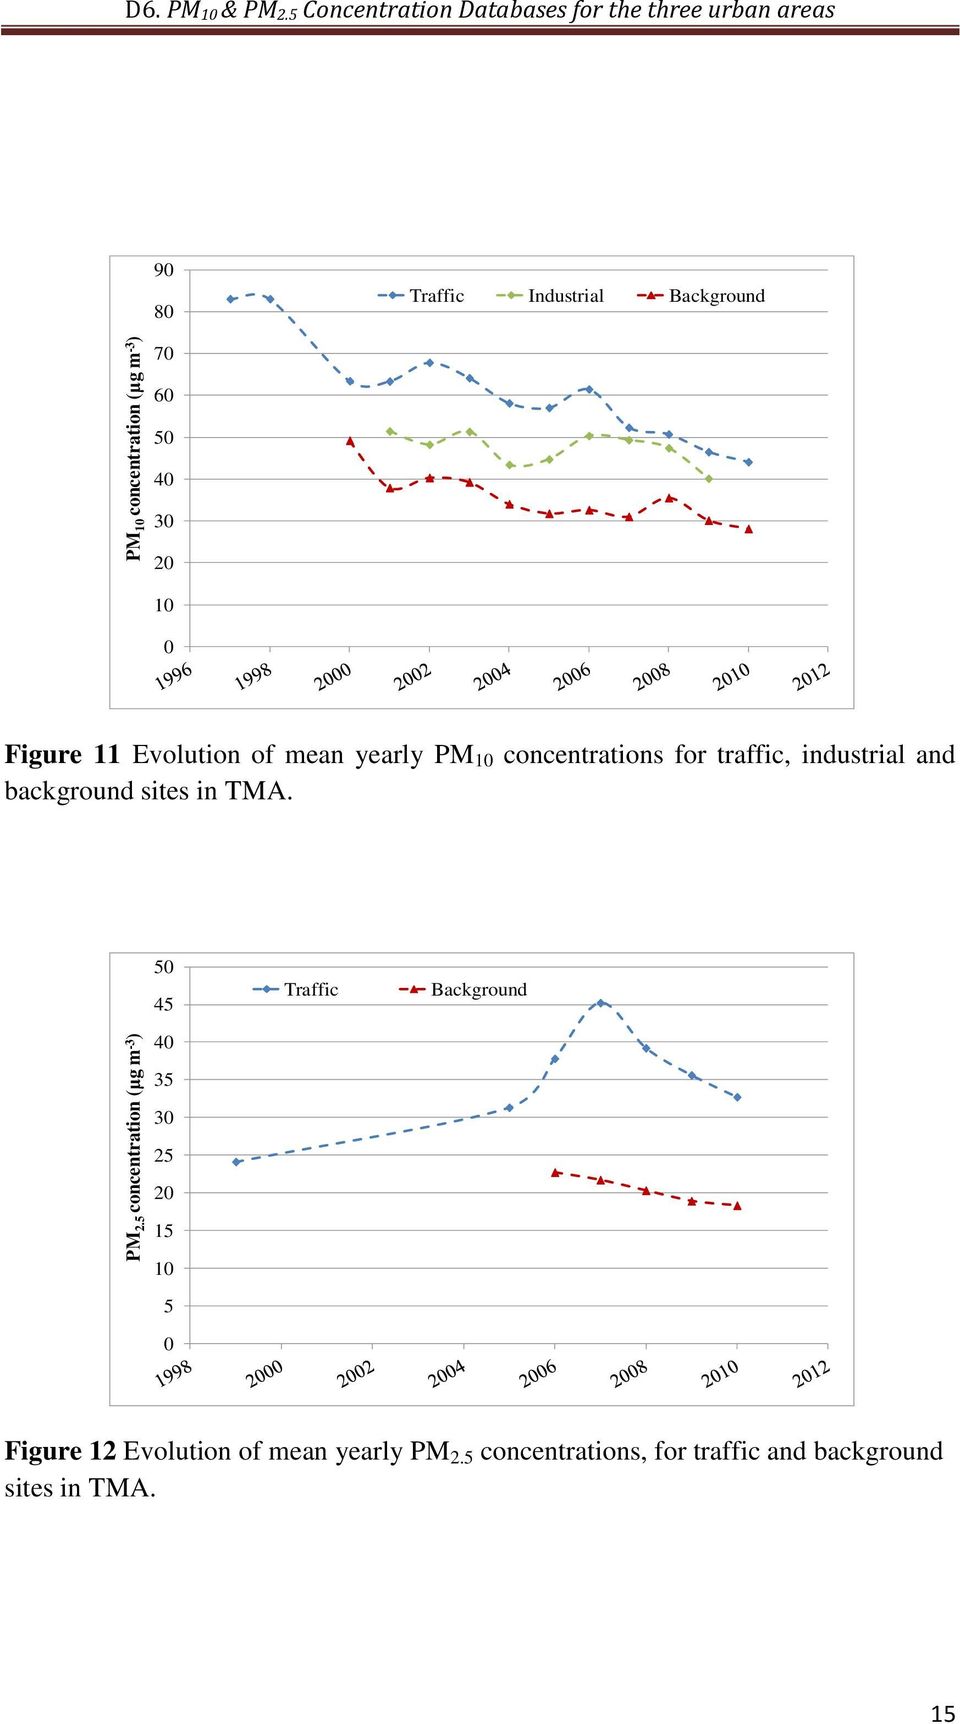 Figure 11 Evolution of mean yearly PM 10 concentrations for traffic, industrial and background sites in TMA.